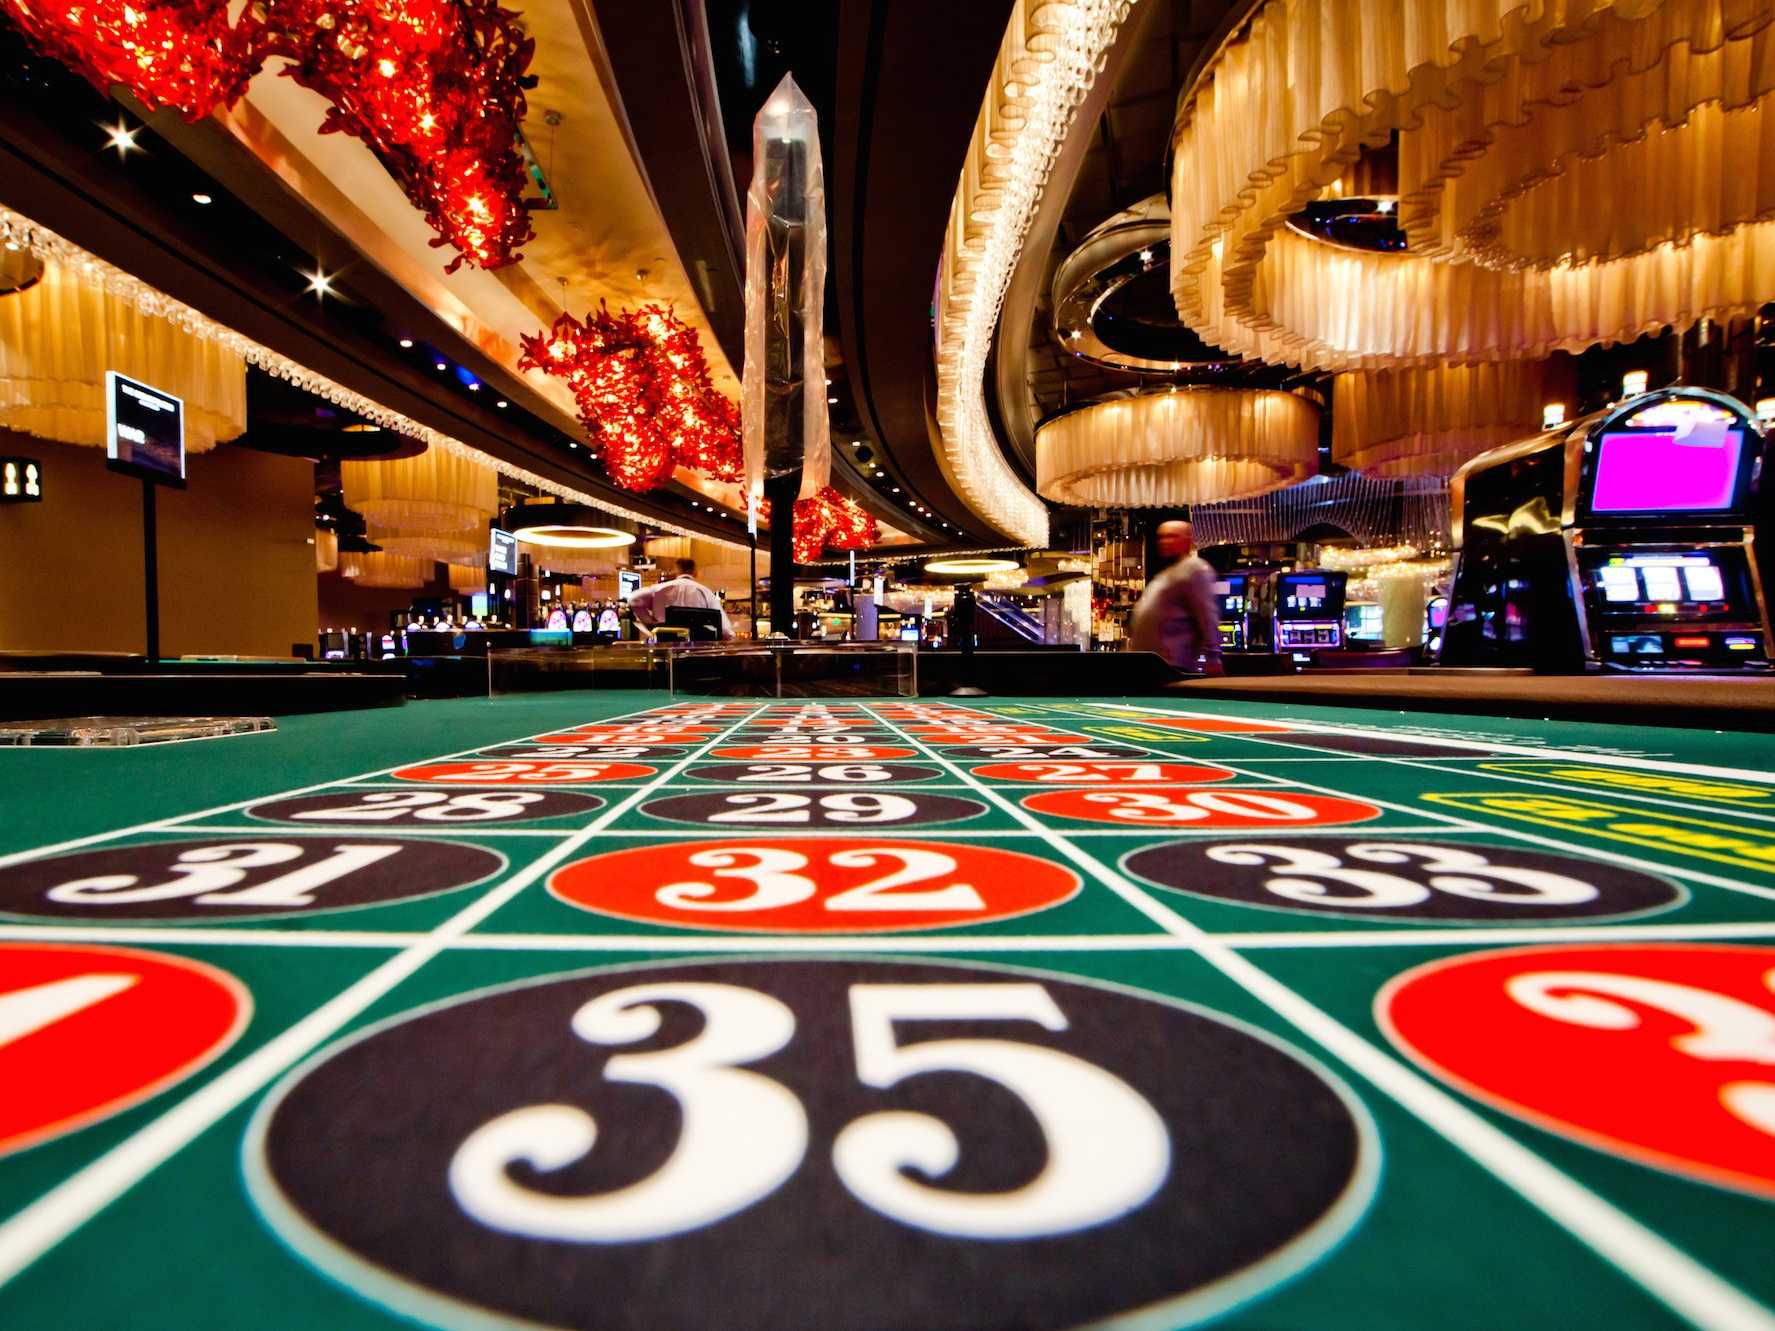 Is This The Most Glamorous Casino In The World?. - Destination Luxury